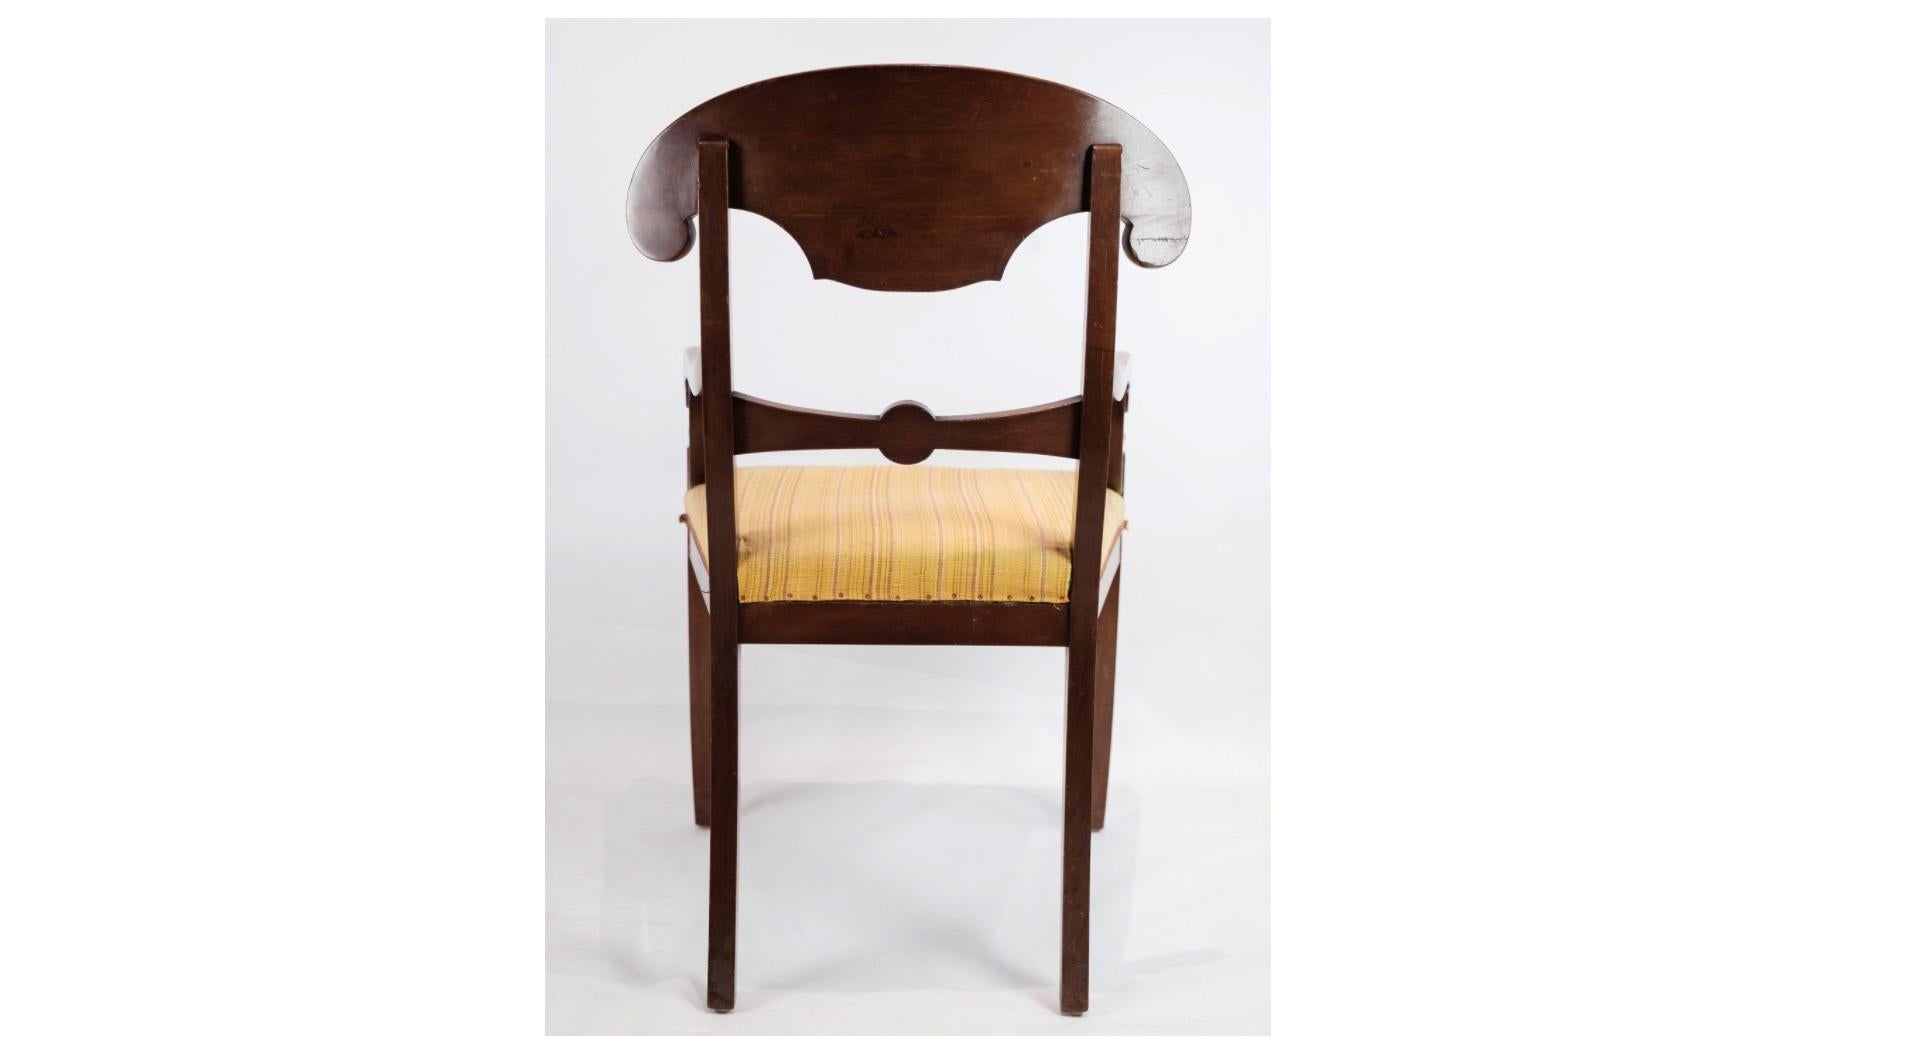 The set of two armchairs made in mahogany with light fabric from the 1860s is a testament to the timeless beauty and craftsmanship of Victorian-era furniture. Crafted from luxurious mahogany wood, renowned for its rich color and durability, these